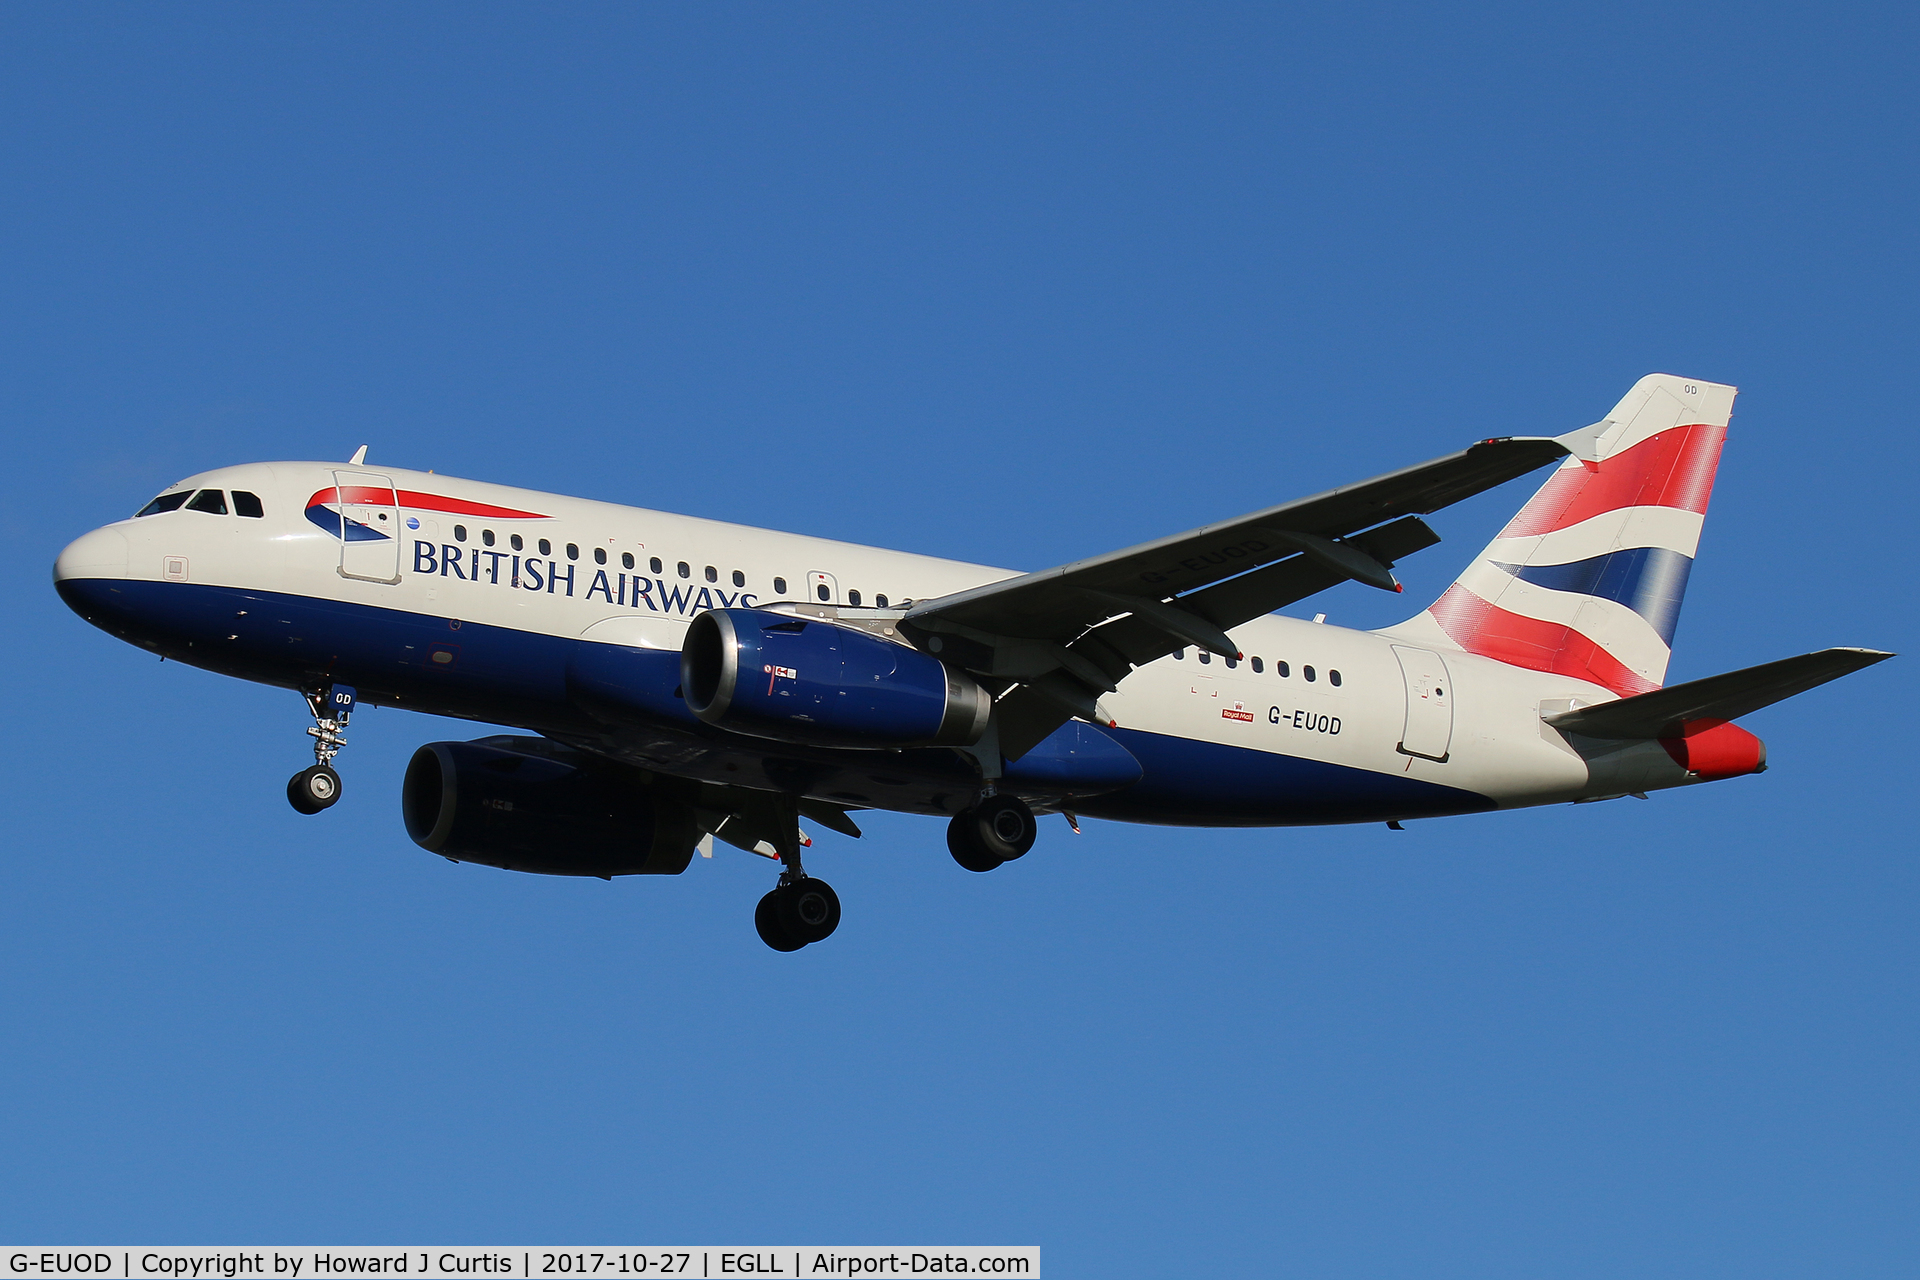 G-EUOD, 2001 Airbus A319-131 C/N 1558, On approach